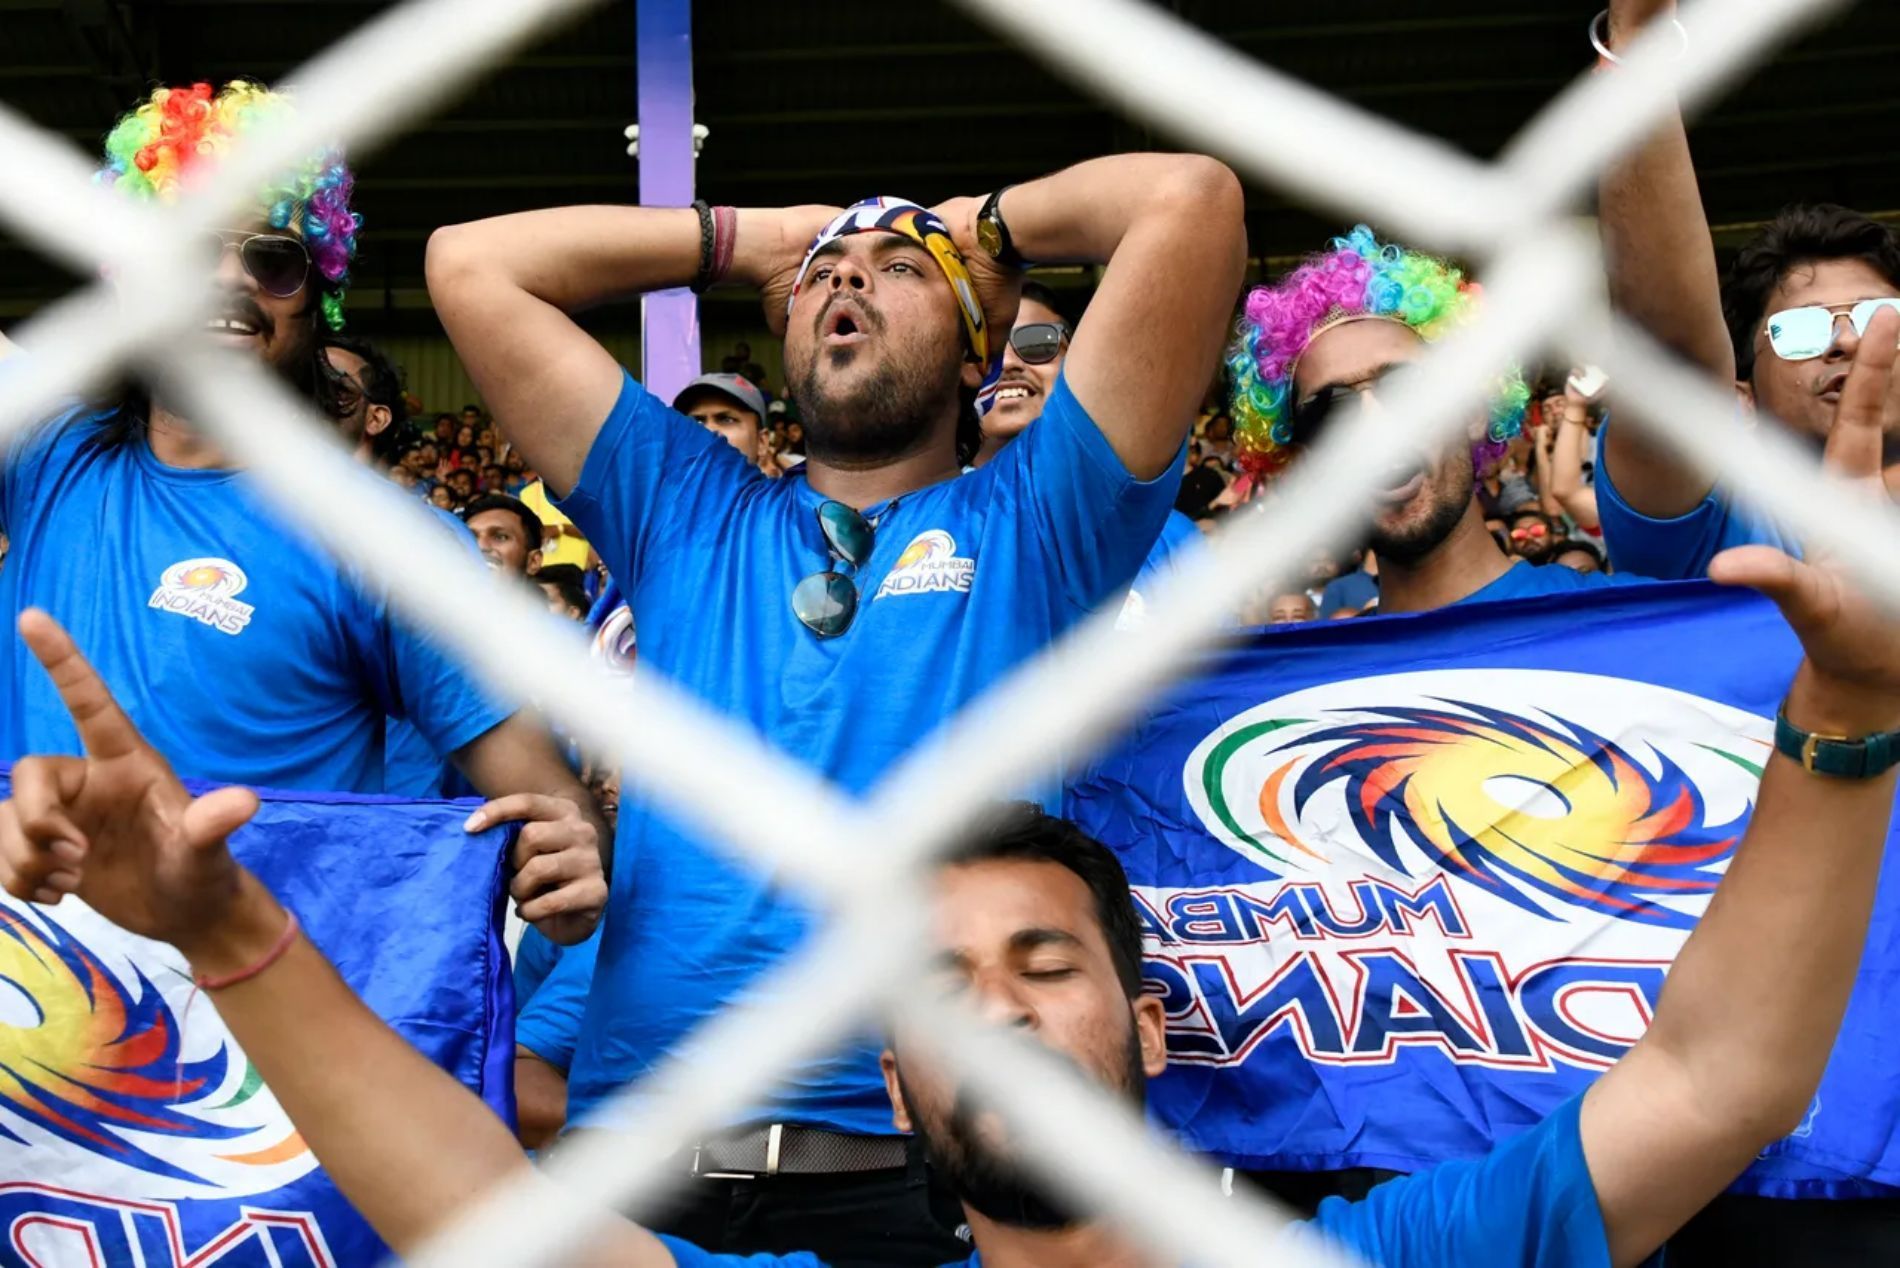 That&rsquo;s MI&rsquo;s campaign in the first two weeks of IPL 2022 summed in one picture. This image was clicked during the franchise&rsquo;s first match of the season against Delhi Capitals.